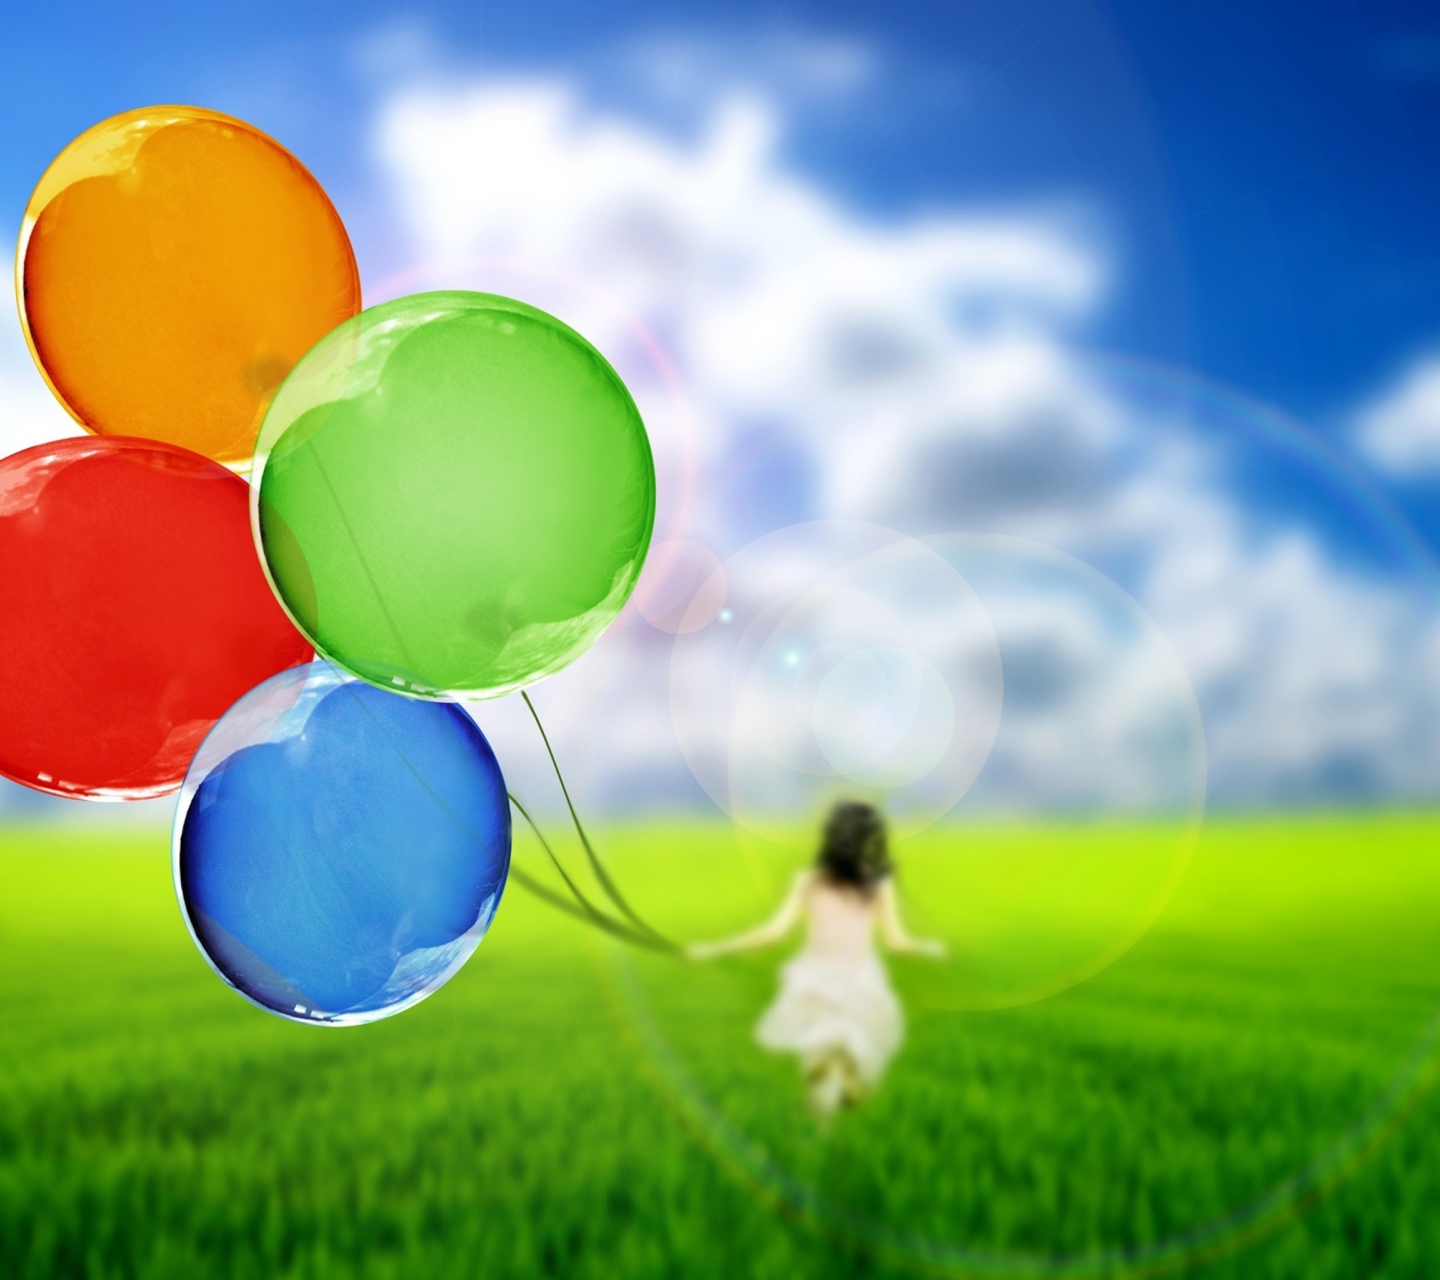 Girl Running With Colorful Balloons wallpaper 1440x1280